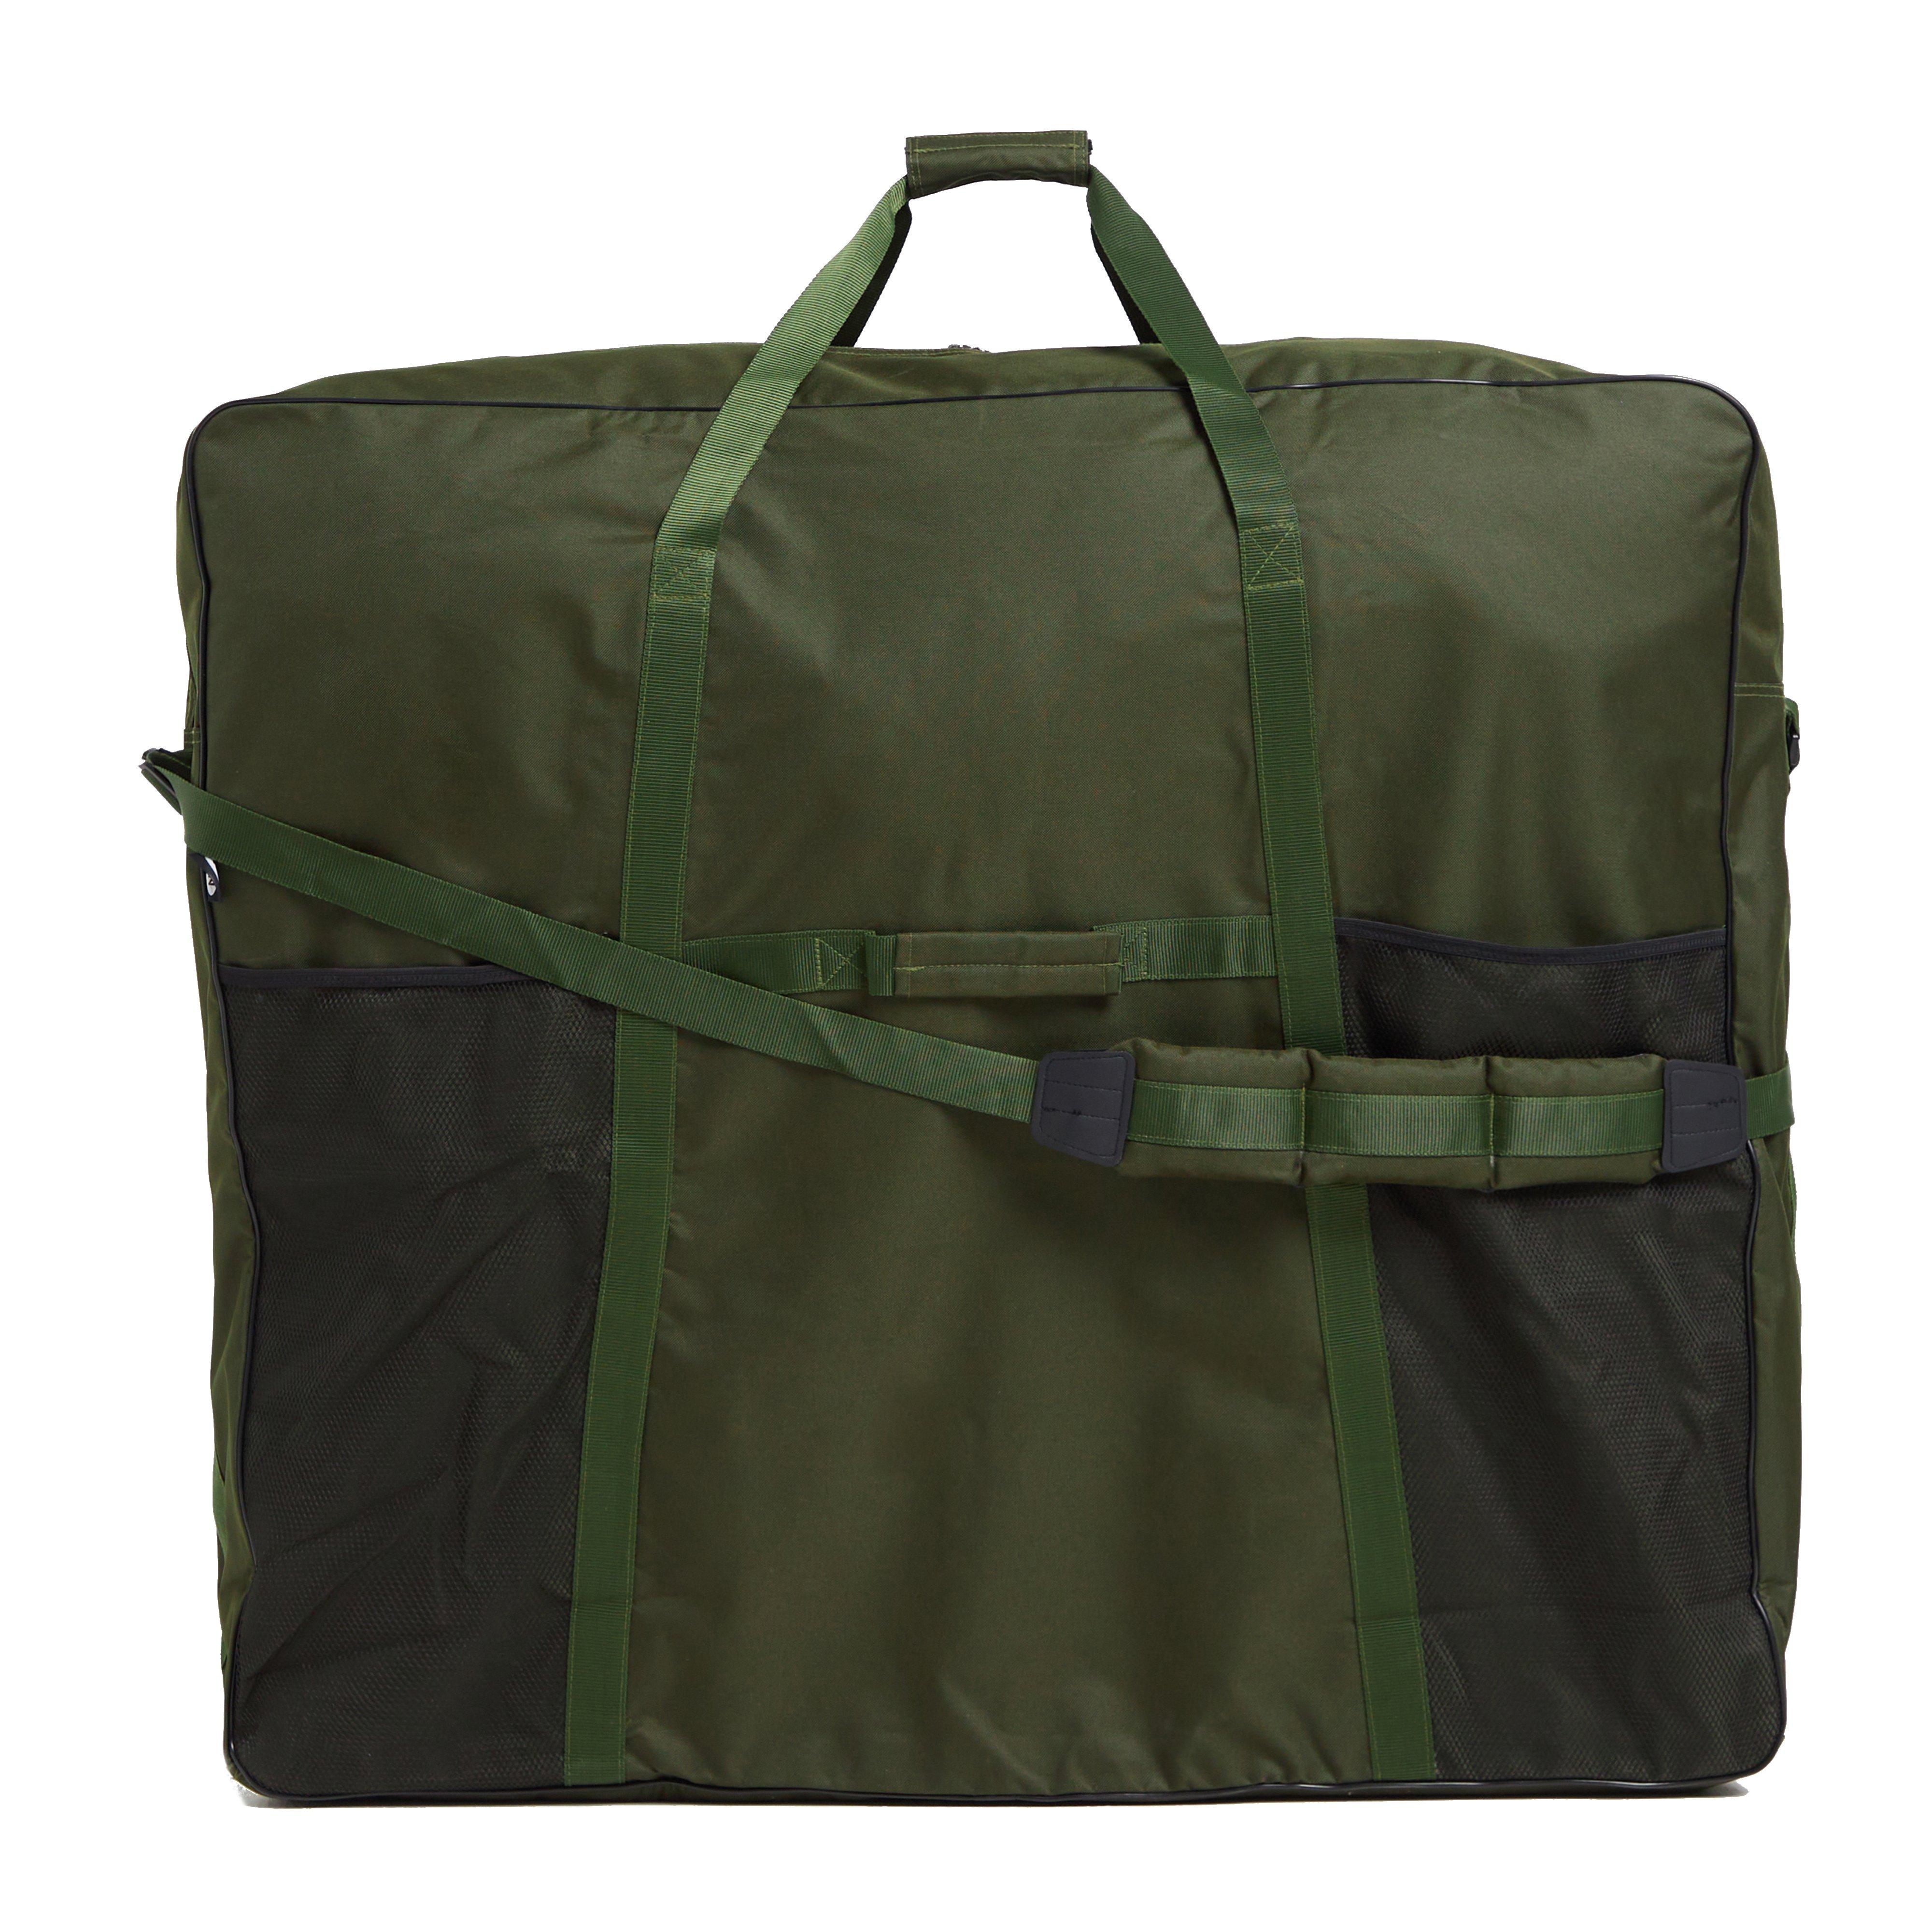 NGT Deluxe Padded Bedchair Bag Review